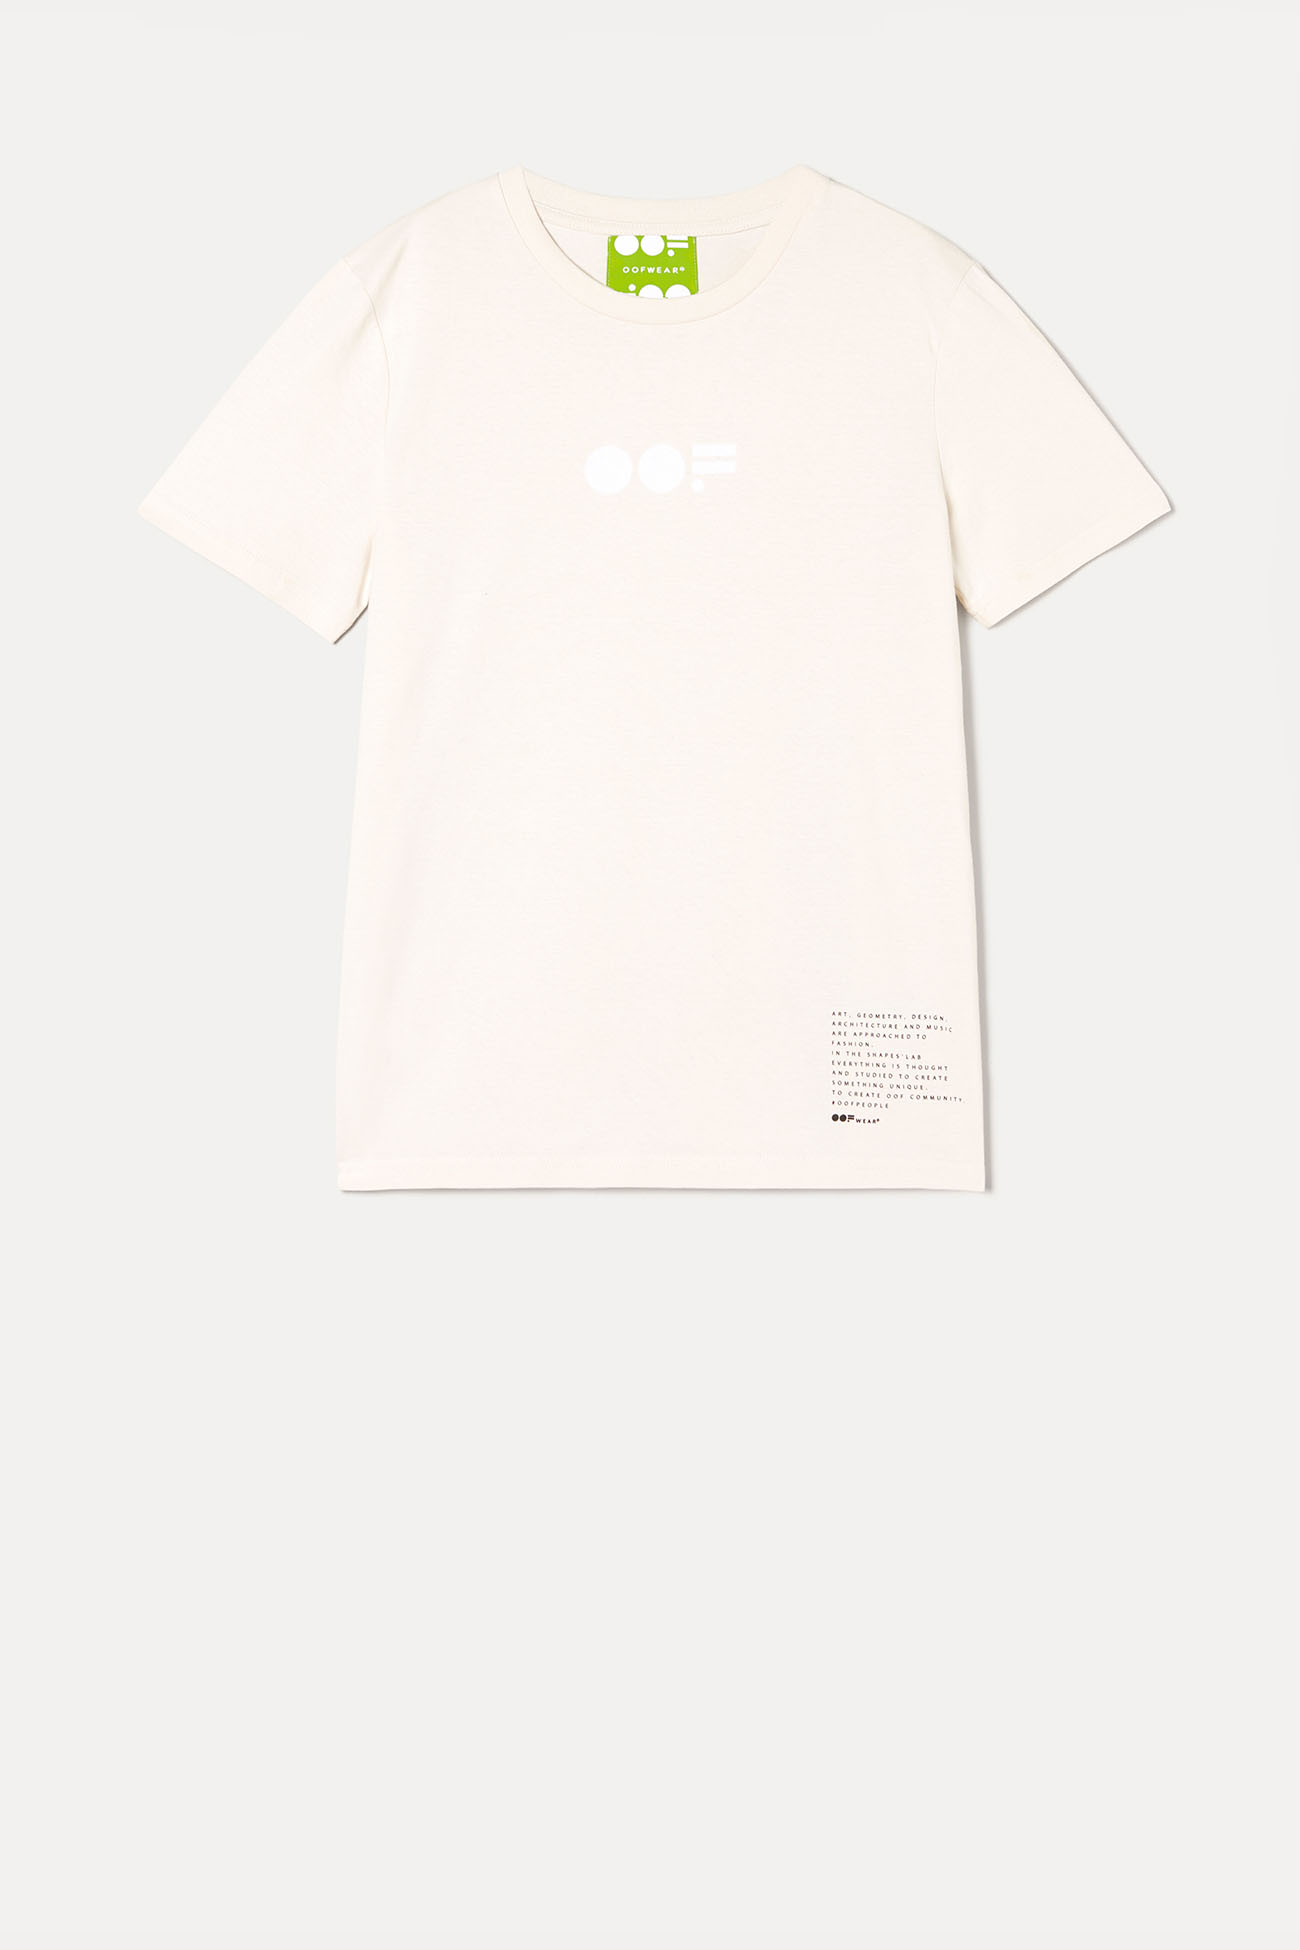 T-SHIRT 7026 MADE IN COTTON  - CREAM - OOF WEAR